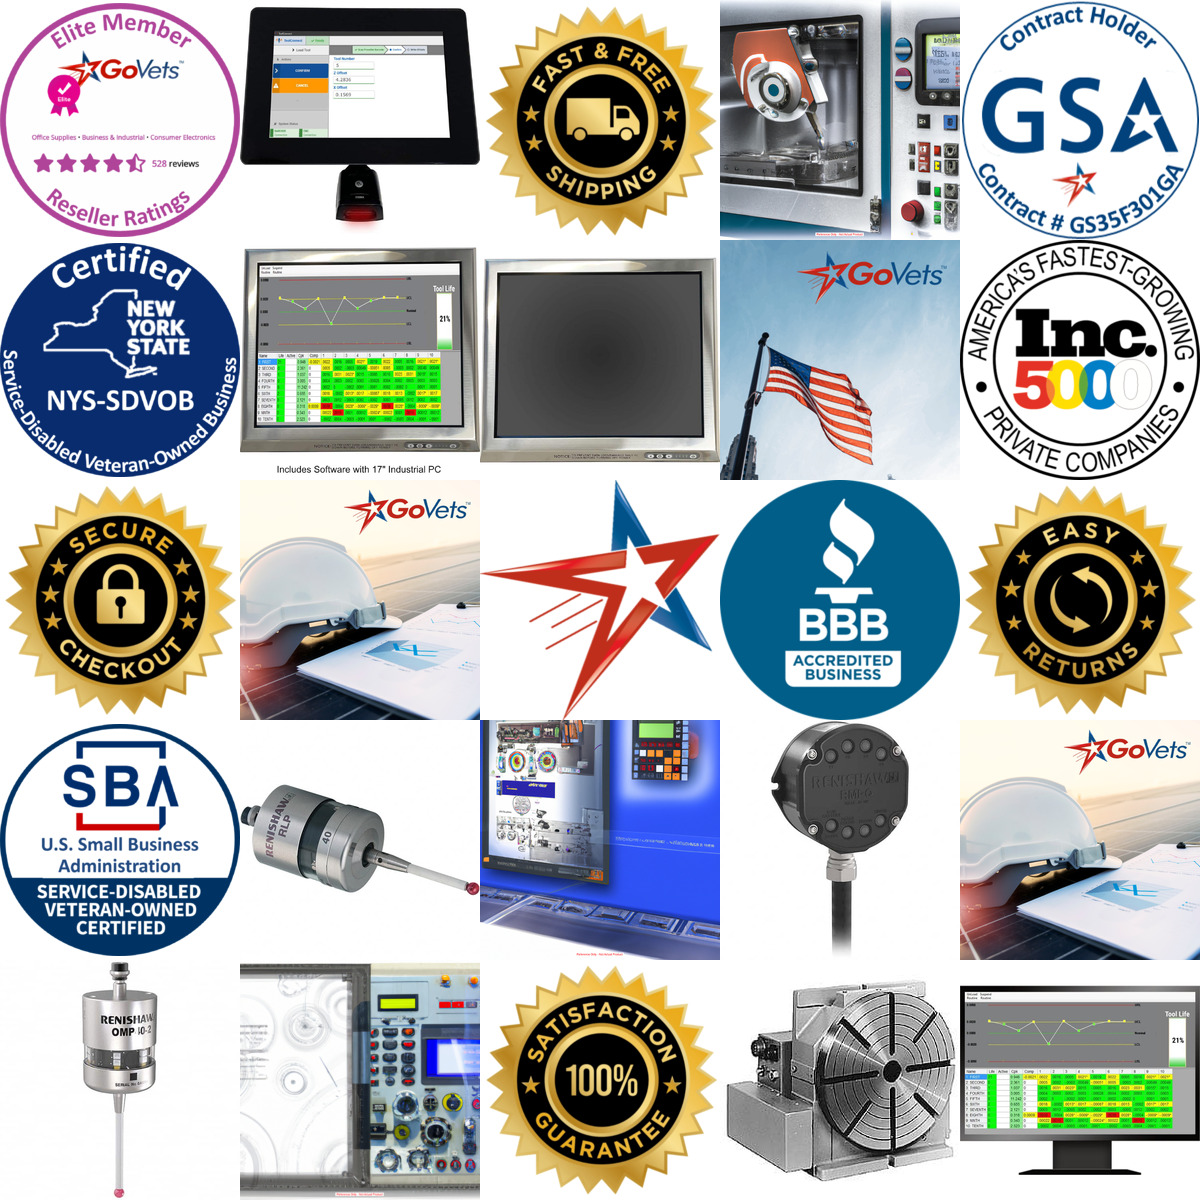 A selection of Cnc Software and Interface Equipment products on GoVets